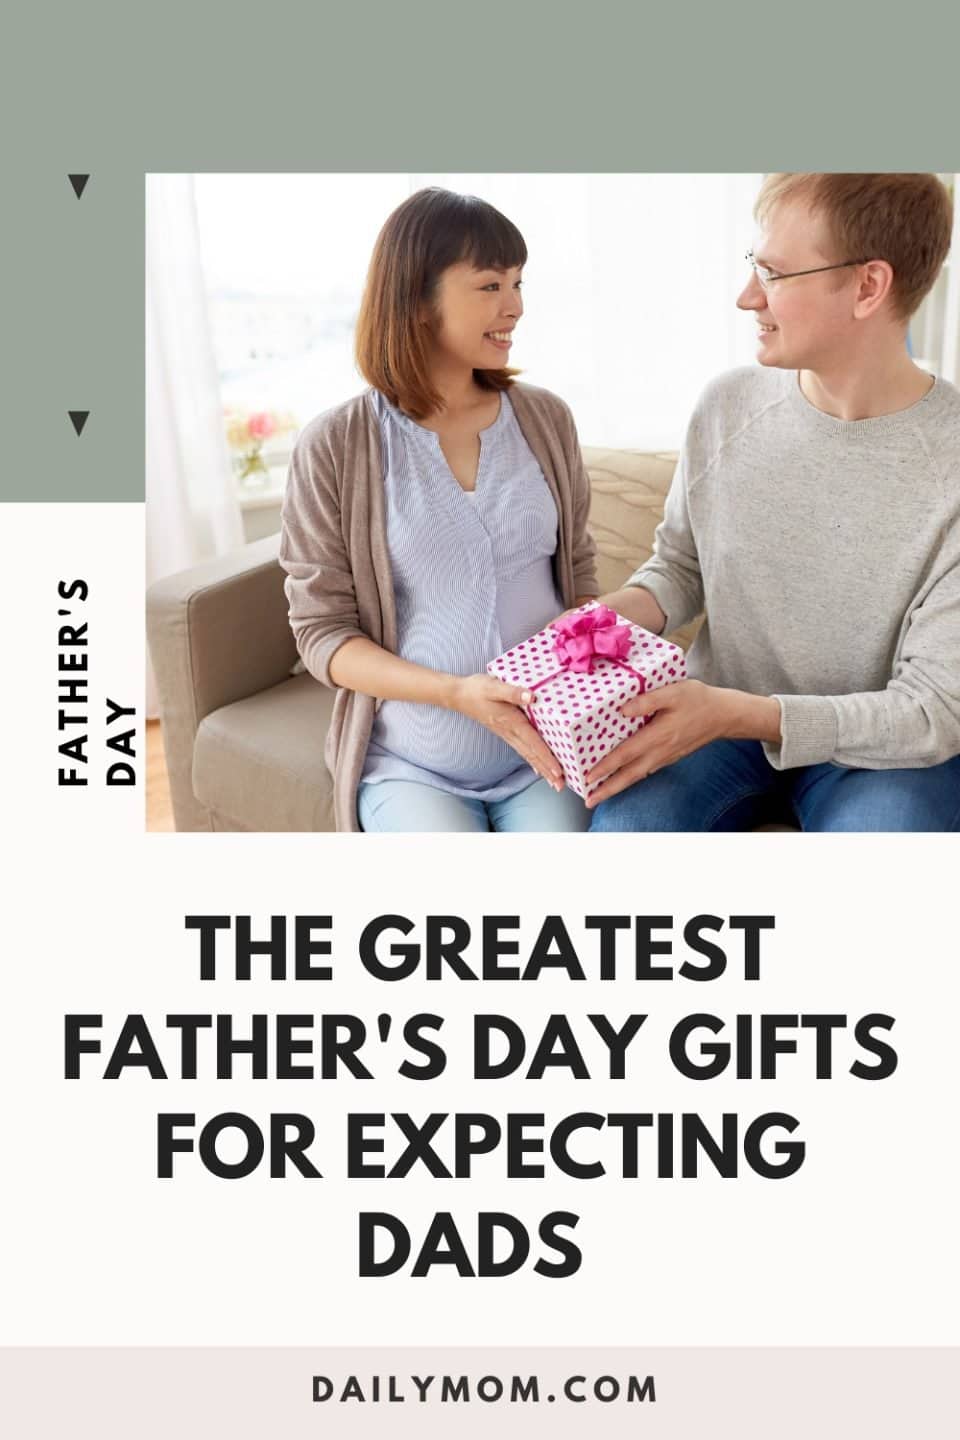 Father'S Day Gifts For Expectant Dads - The New Dad Gifts That Will Make A First-Time Dad Ready To Rock Fatherhood  51 Daily Mom, Magazine For Families